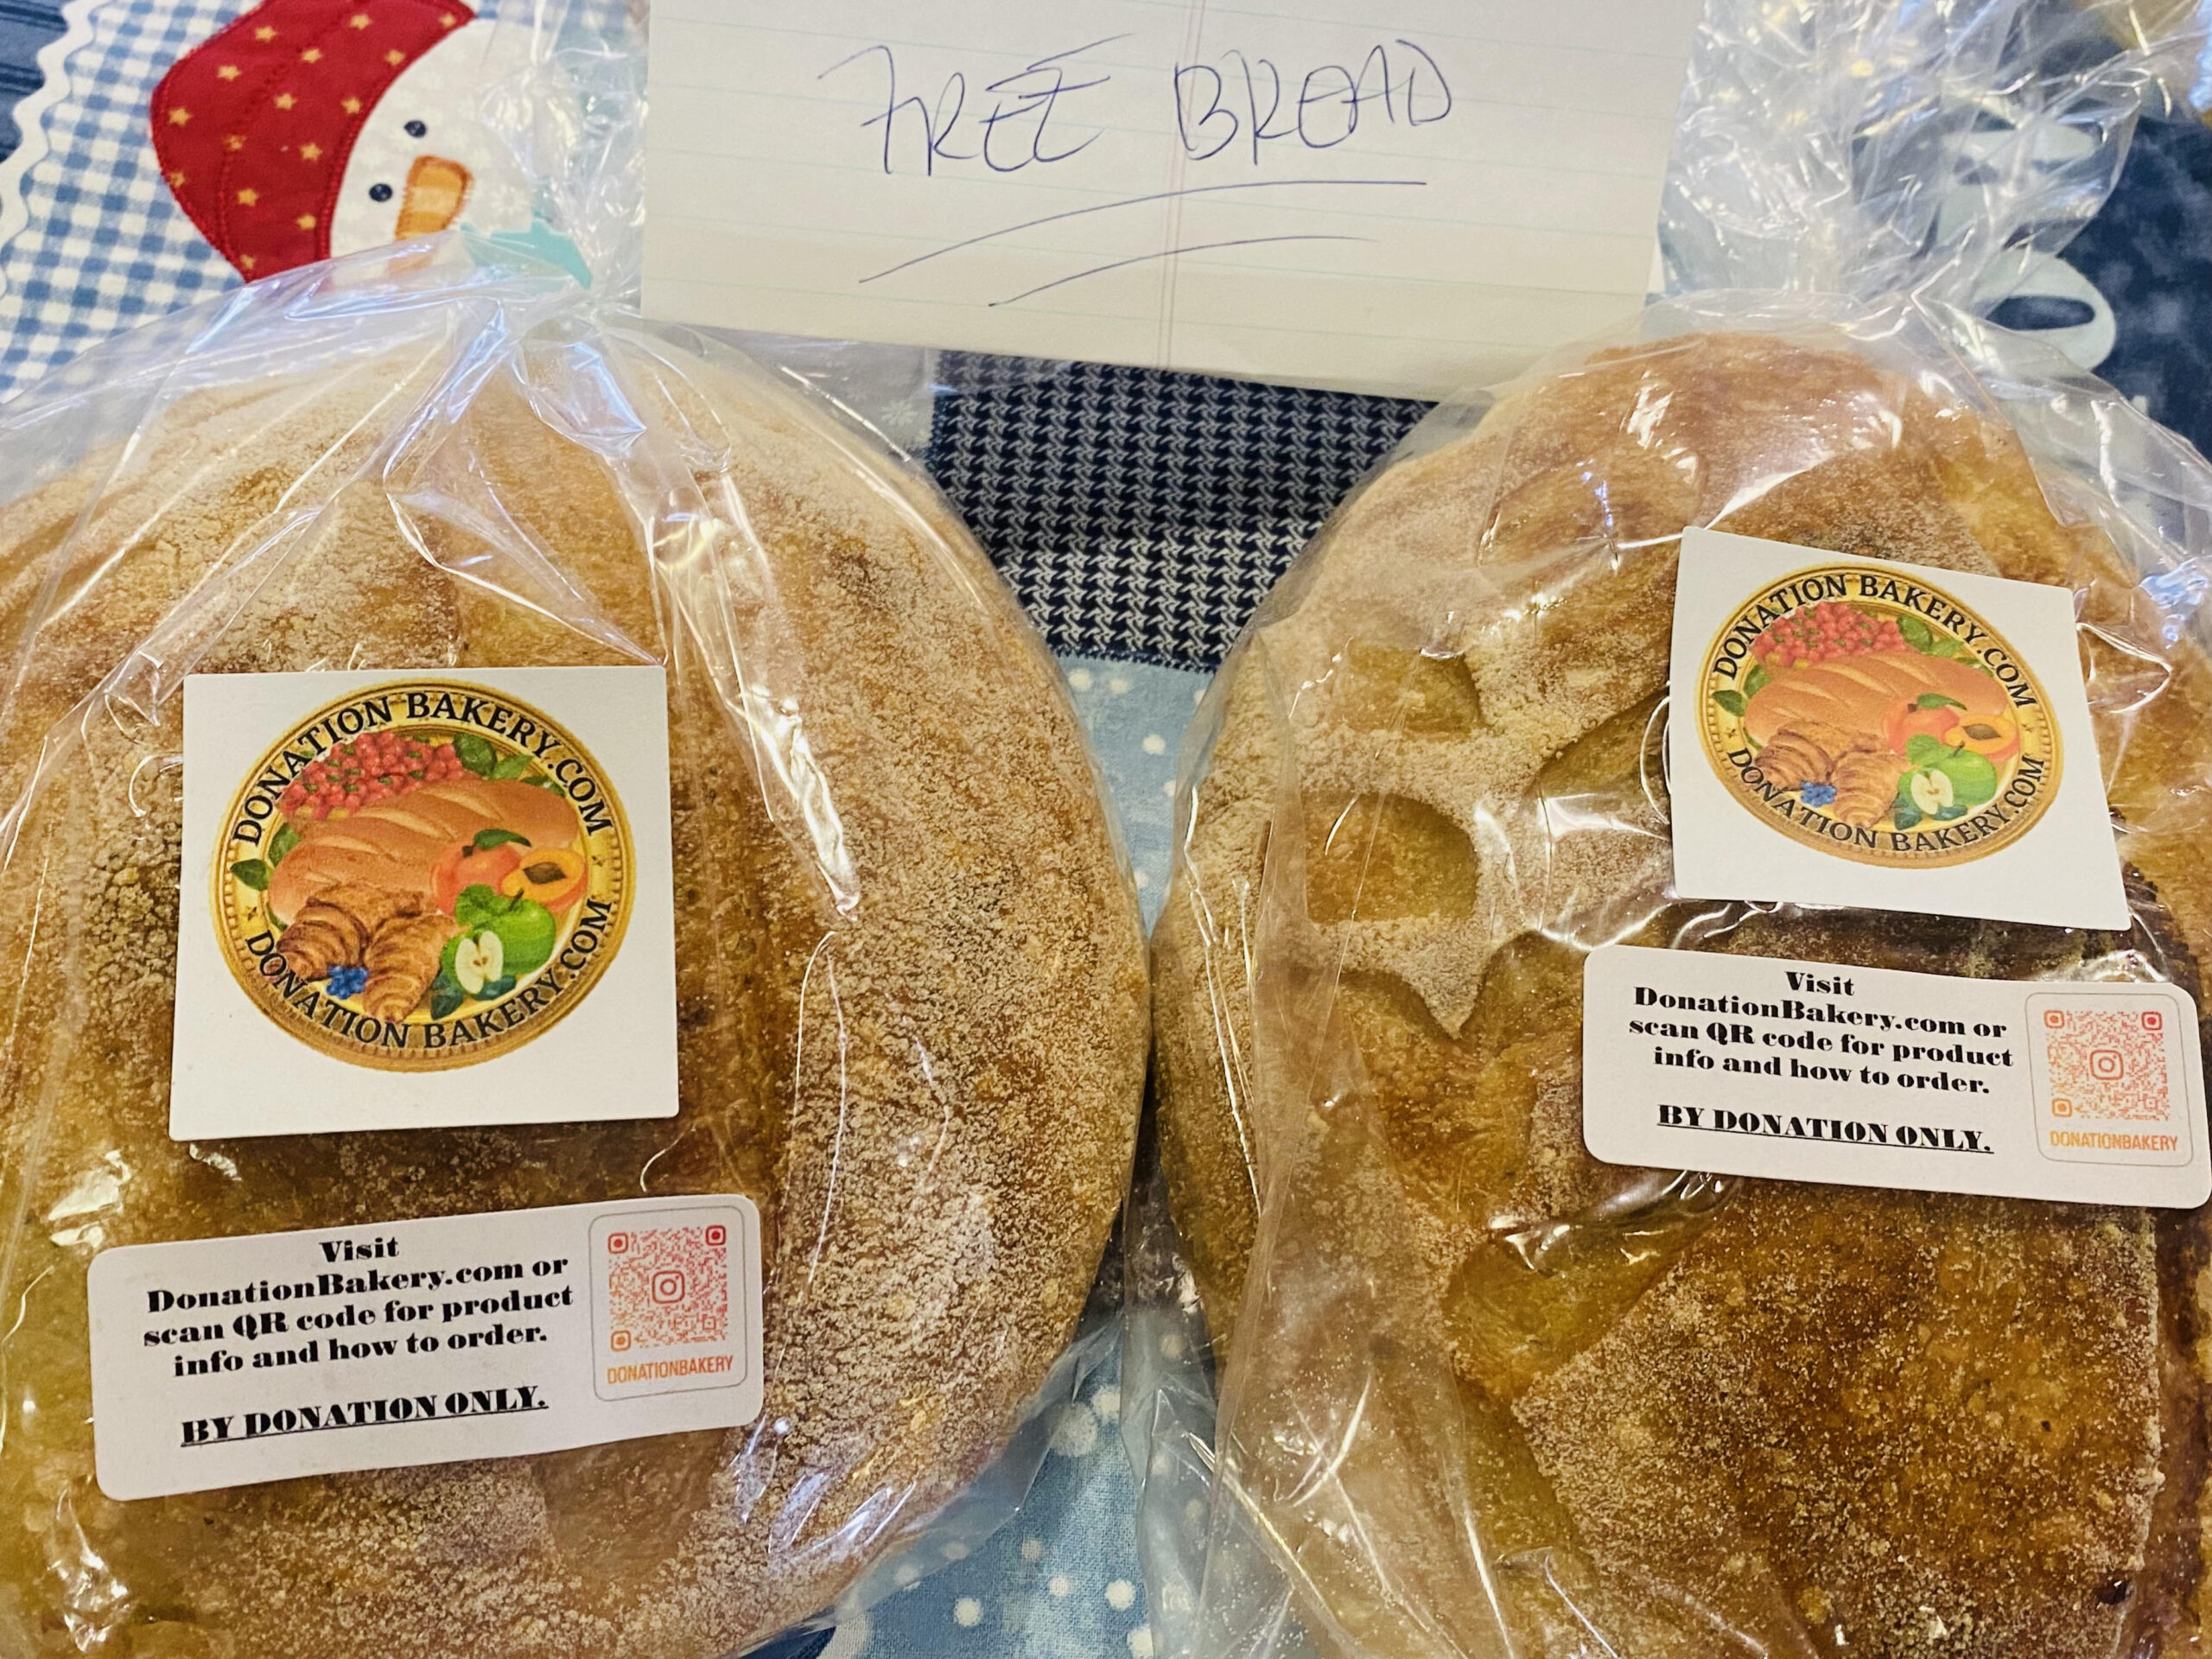 free bread labeled